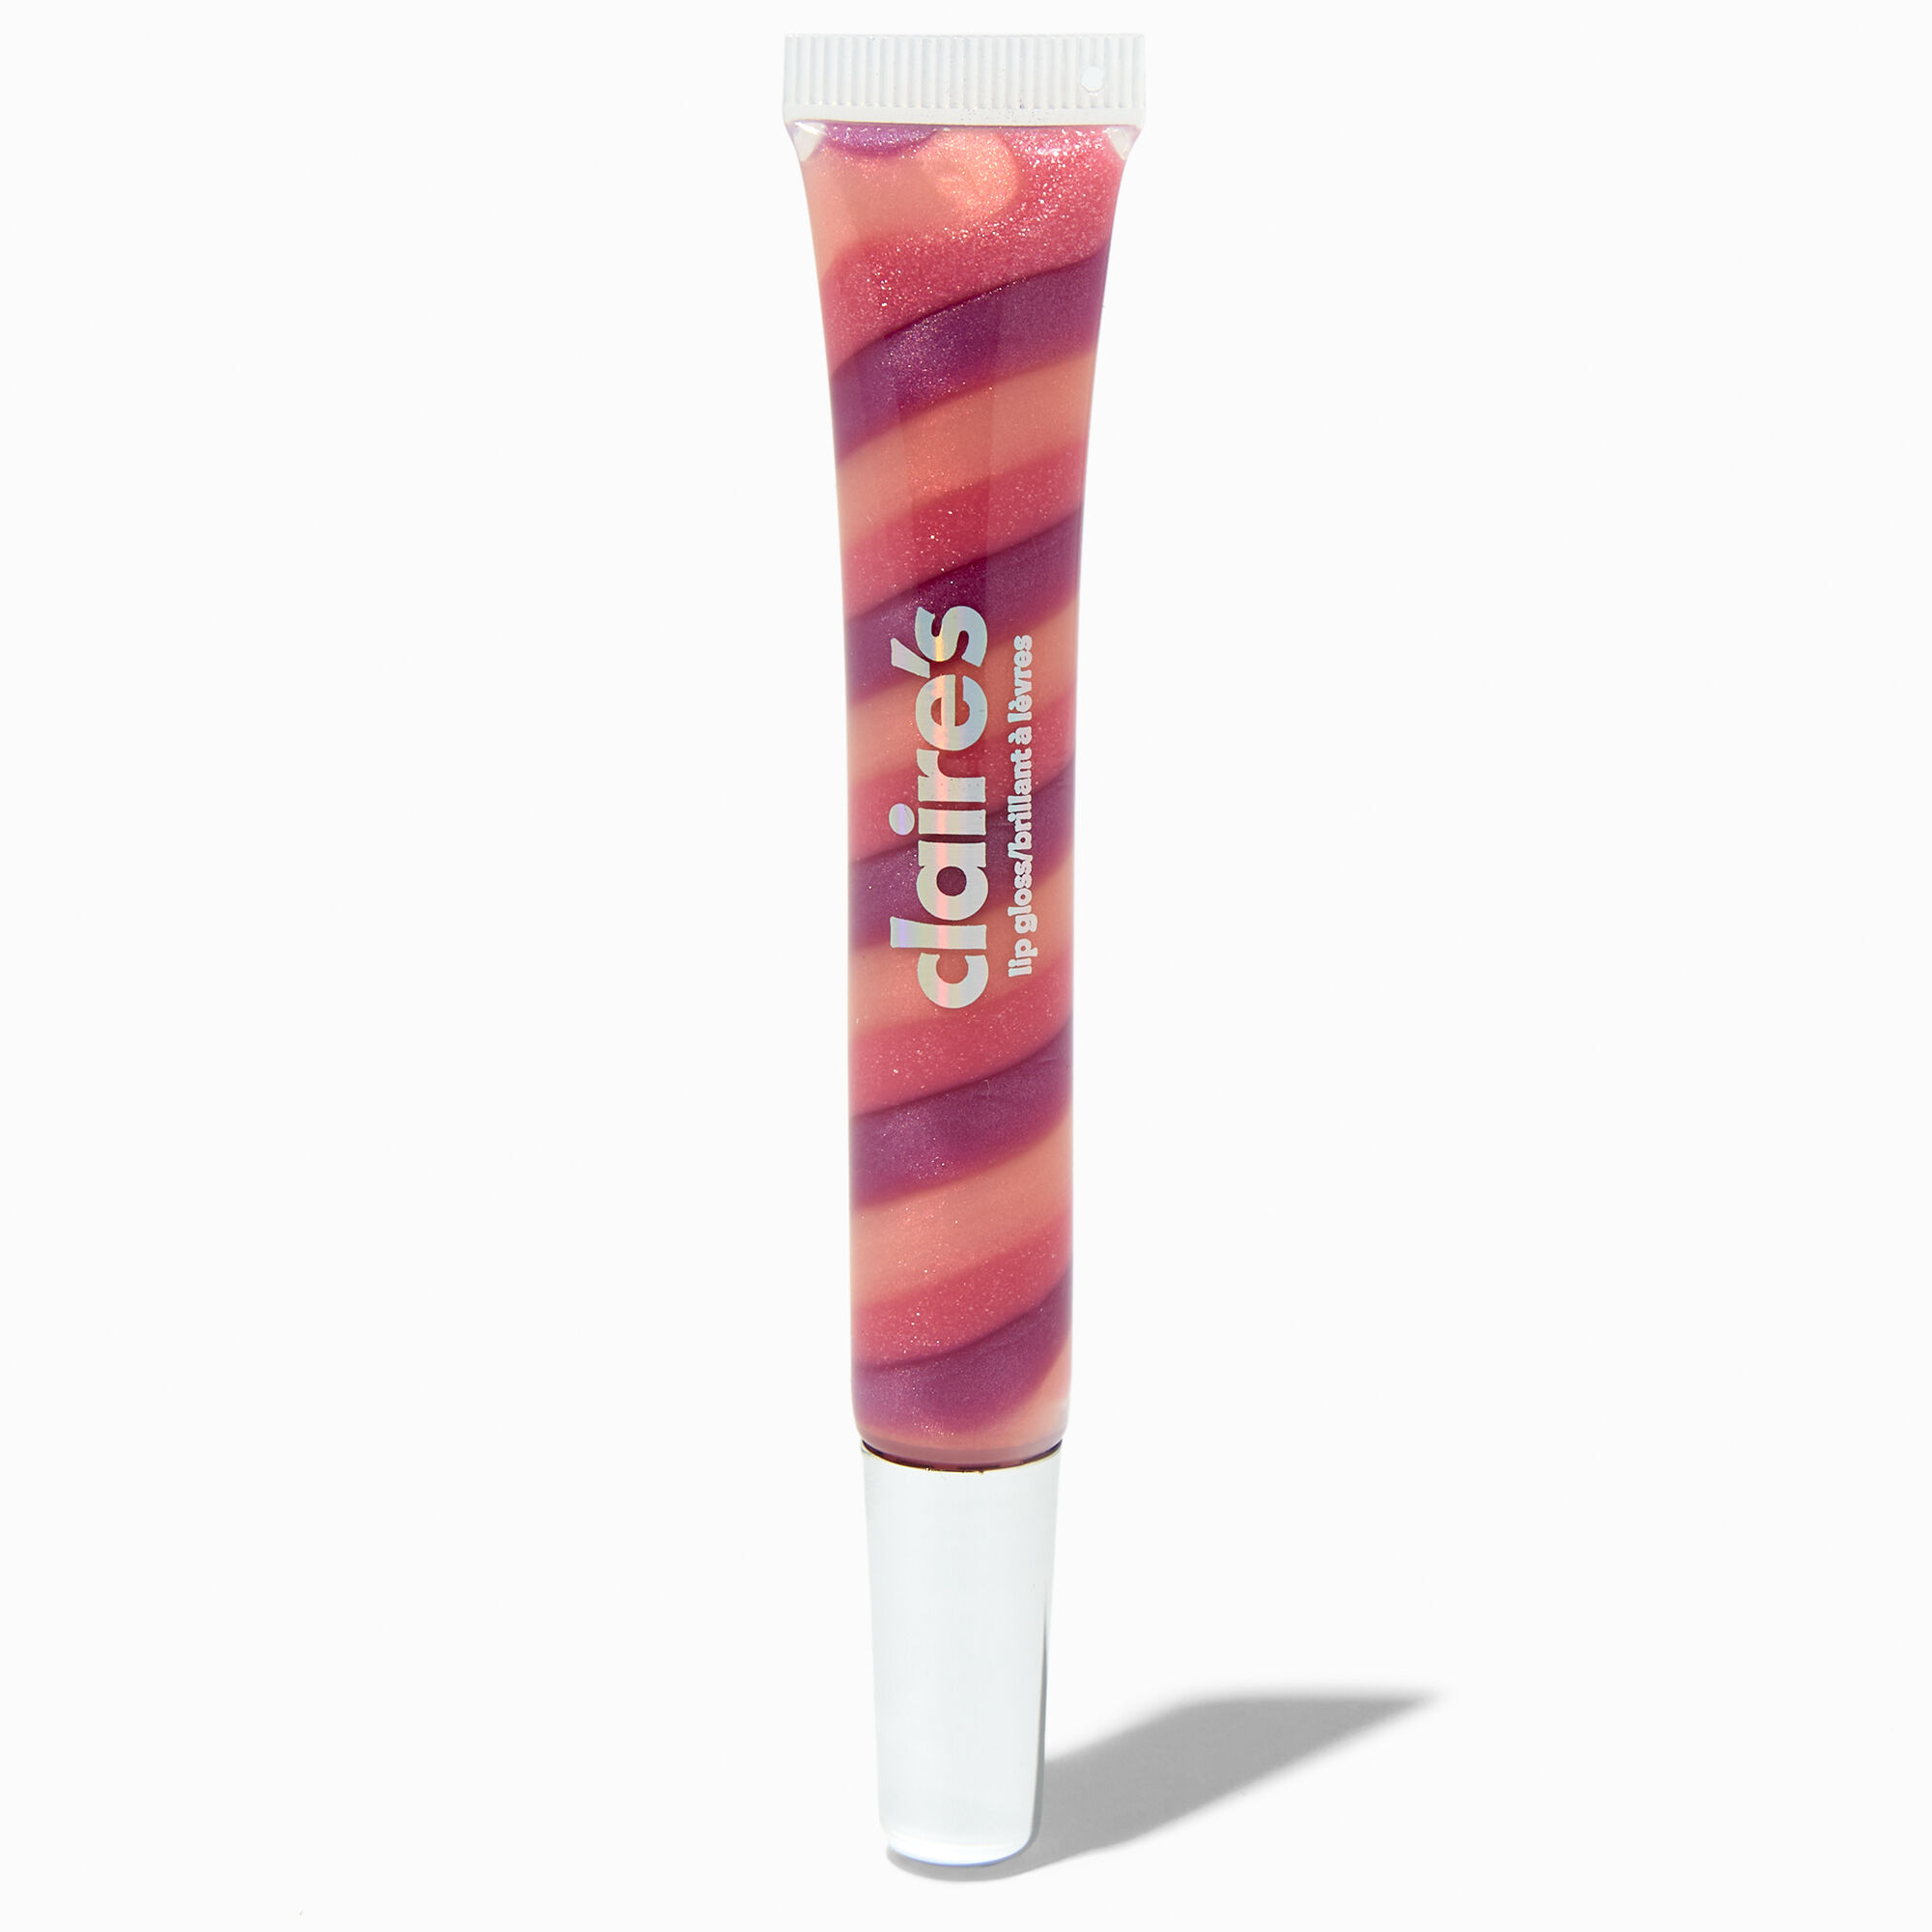 View Claires Swirl Glitter Lip Gloss Tube Pink information